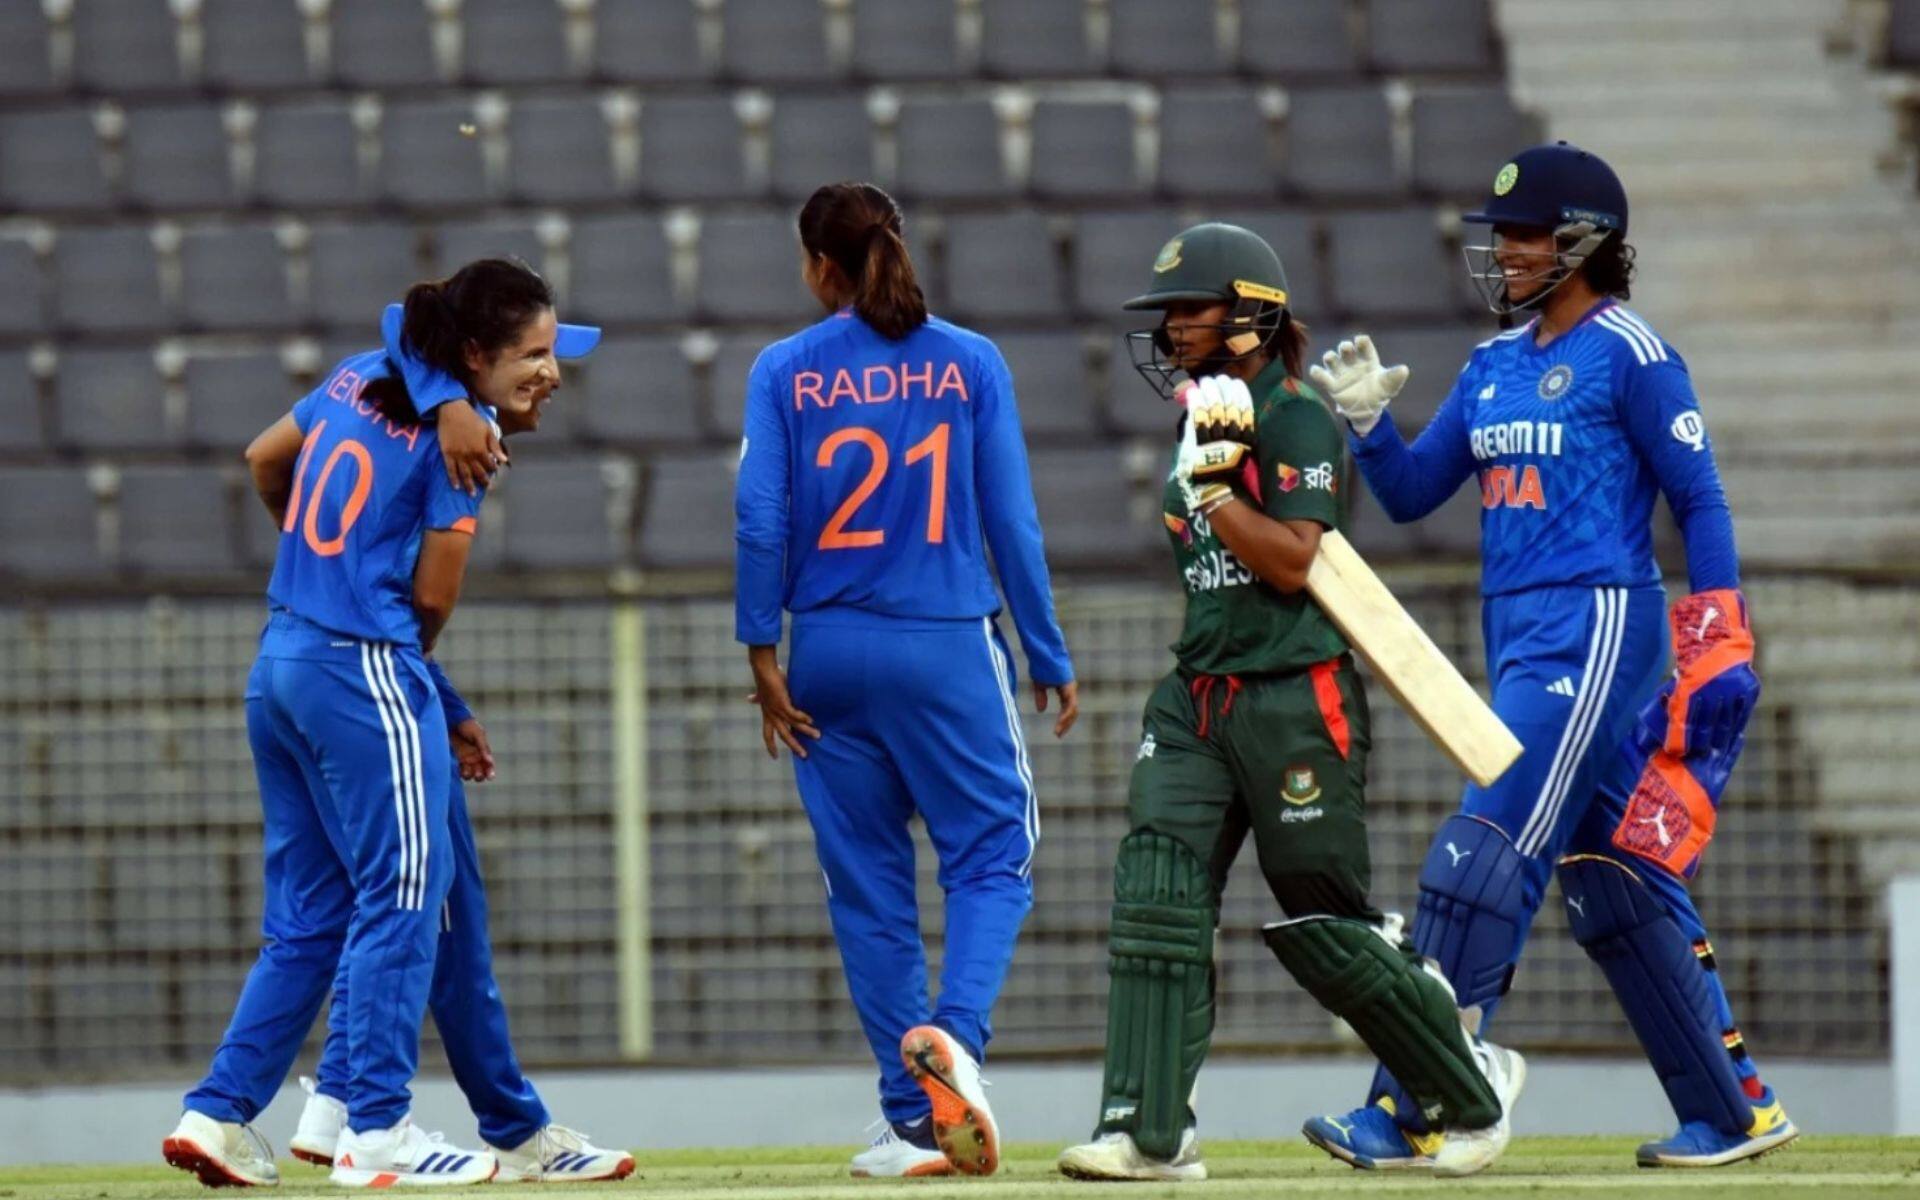 Indian players celebrating a Bangladesh wicket during first T20I (BCB)